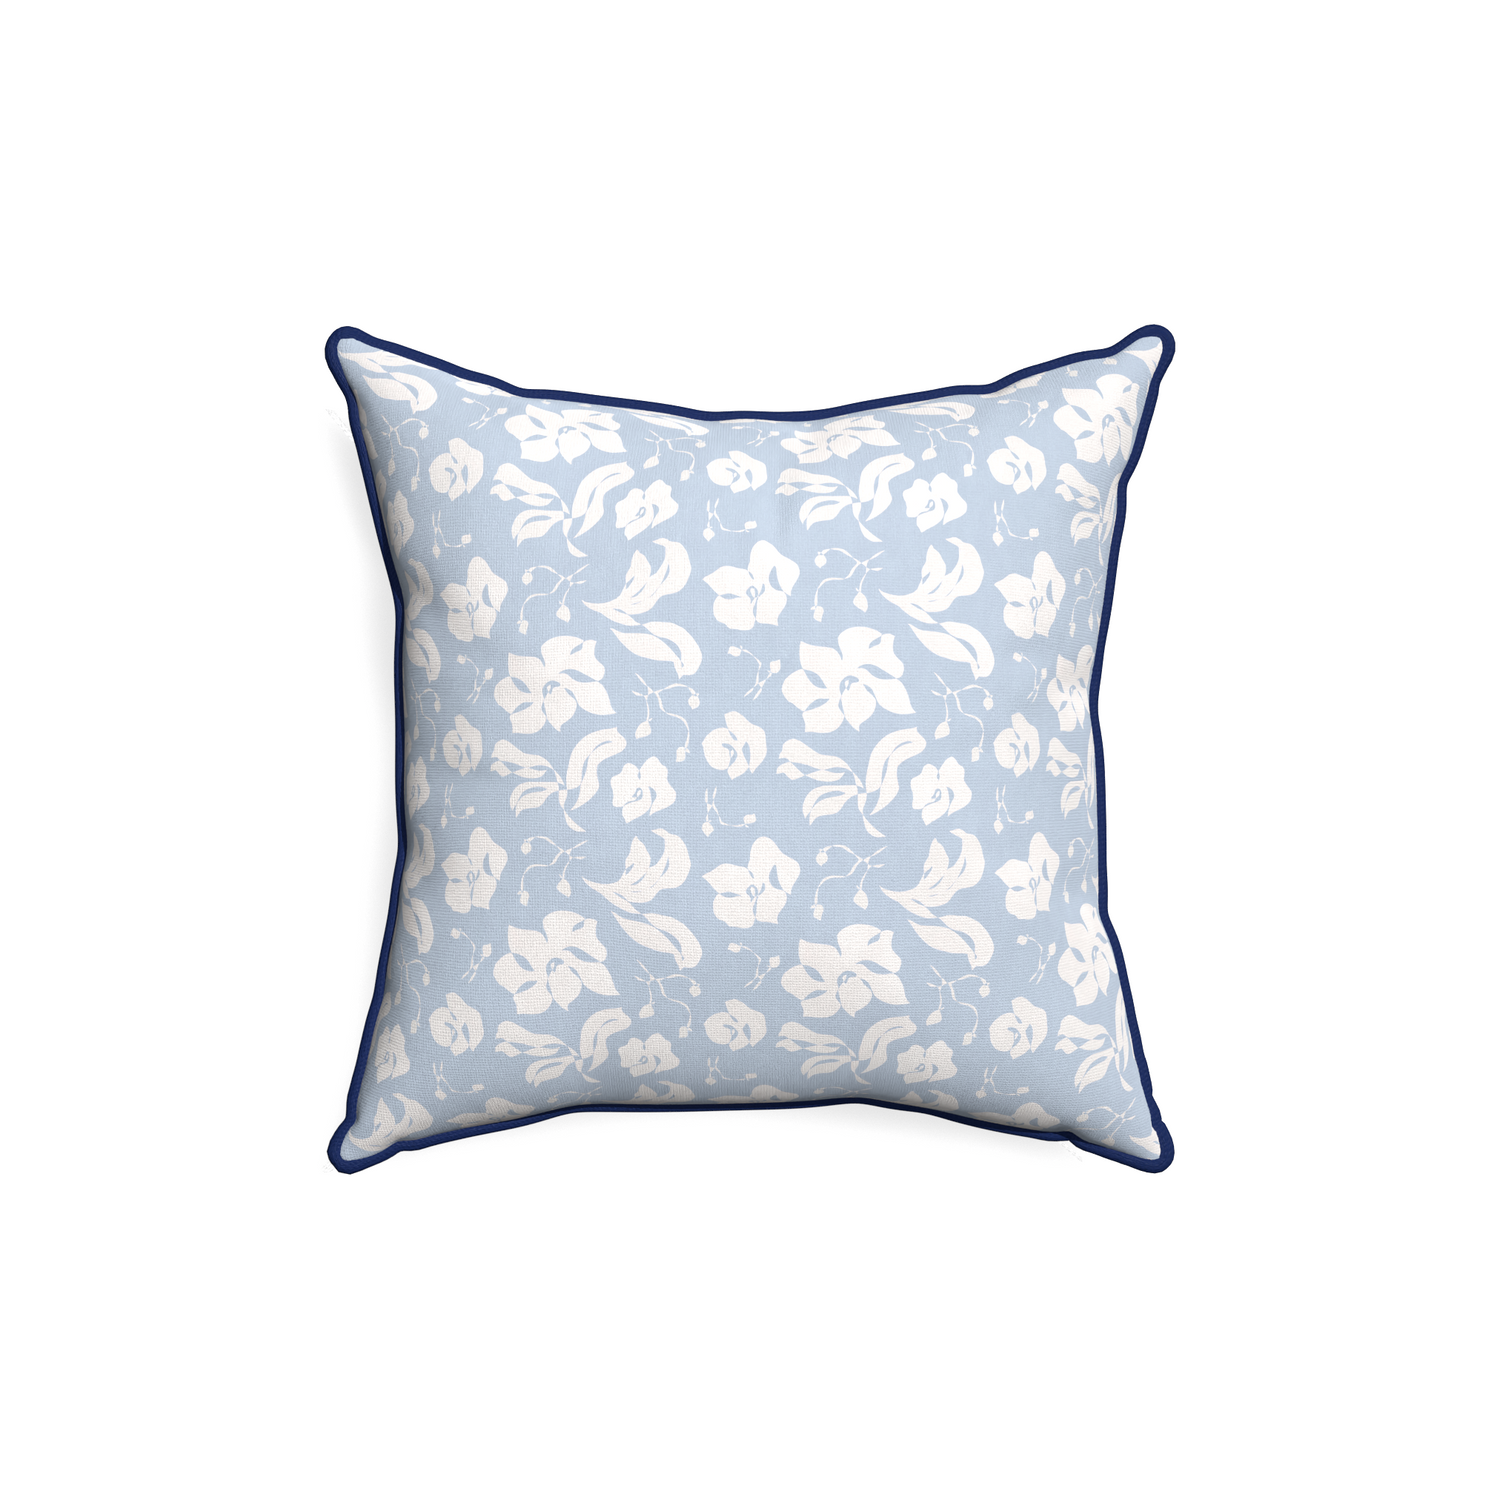 18-square georgia custom cornflower blue floralpillow with midnight piping on white background